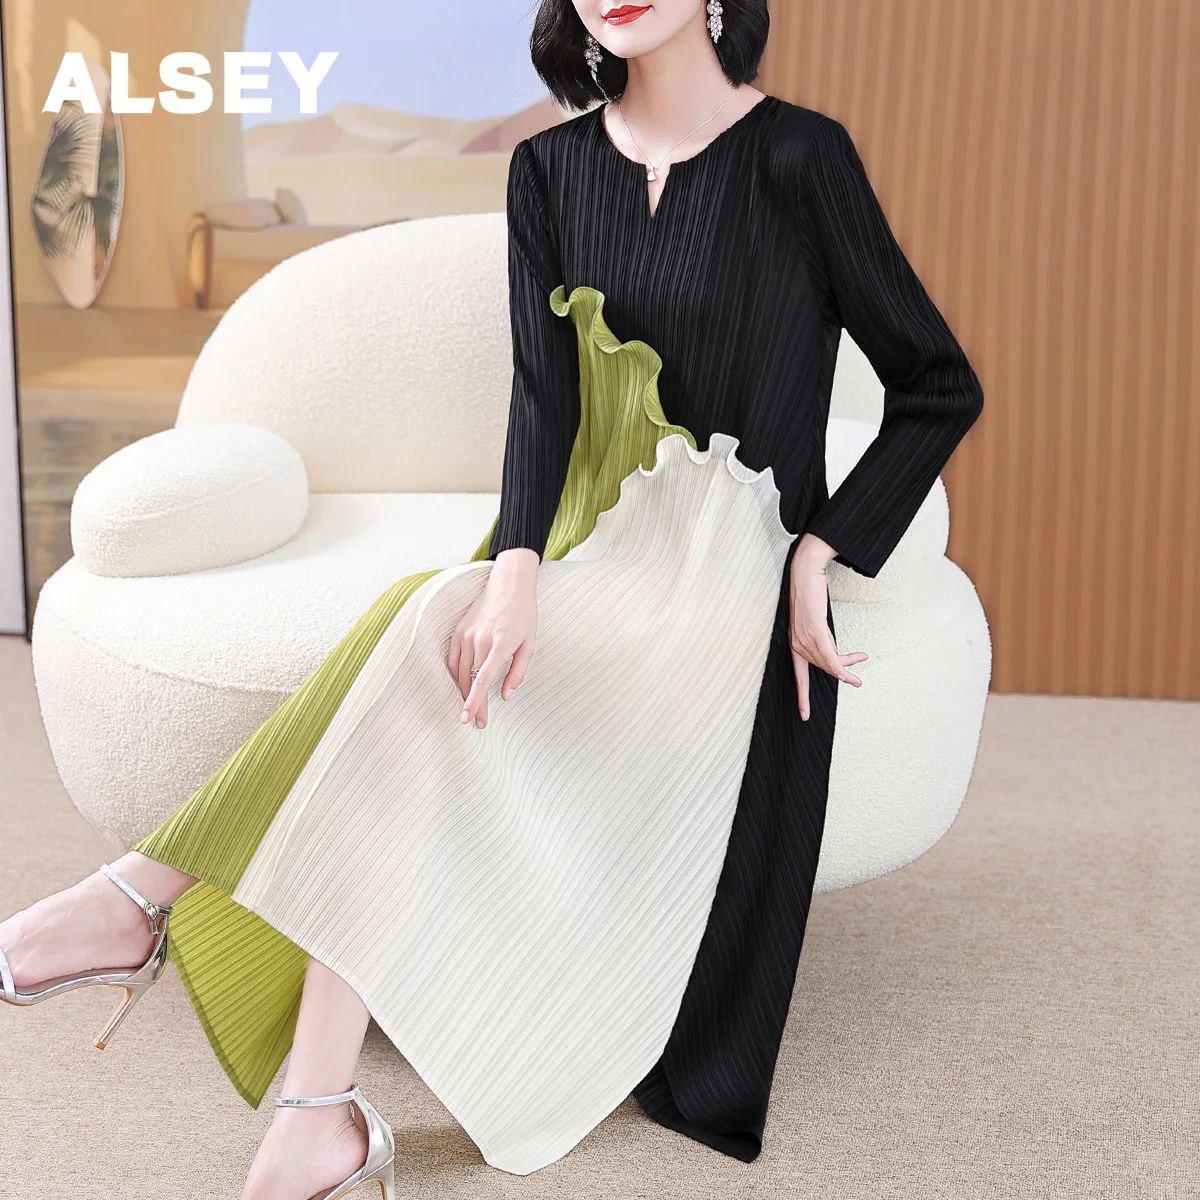 

ALSEY Miyake Pleated Dress for Women Autumn New Fashion Stitching V-neck Loose Plus Size Casual A- Line Luxury Evening Dresses